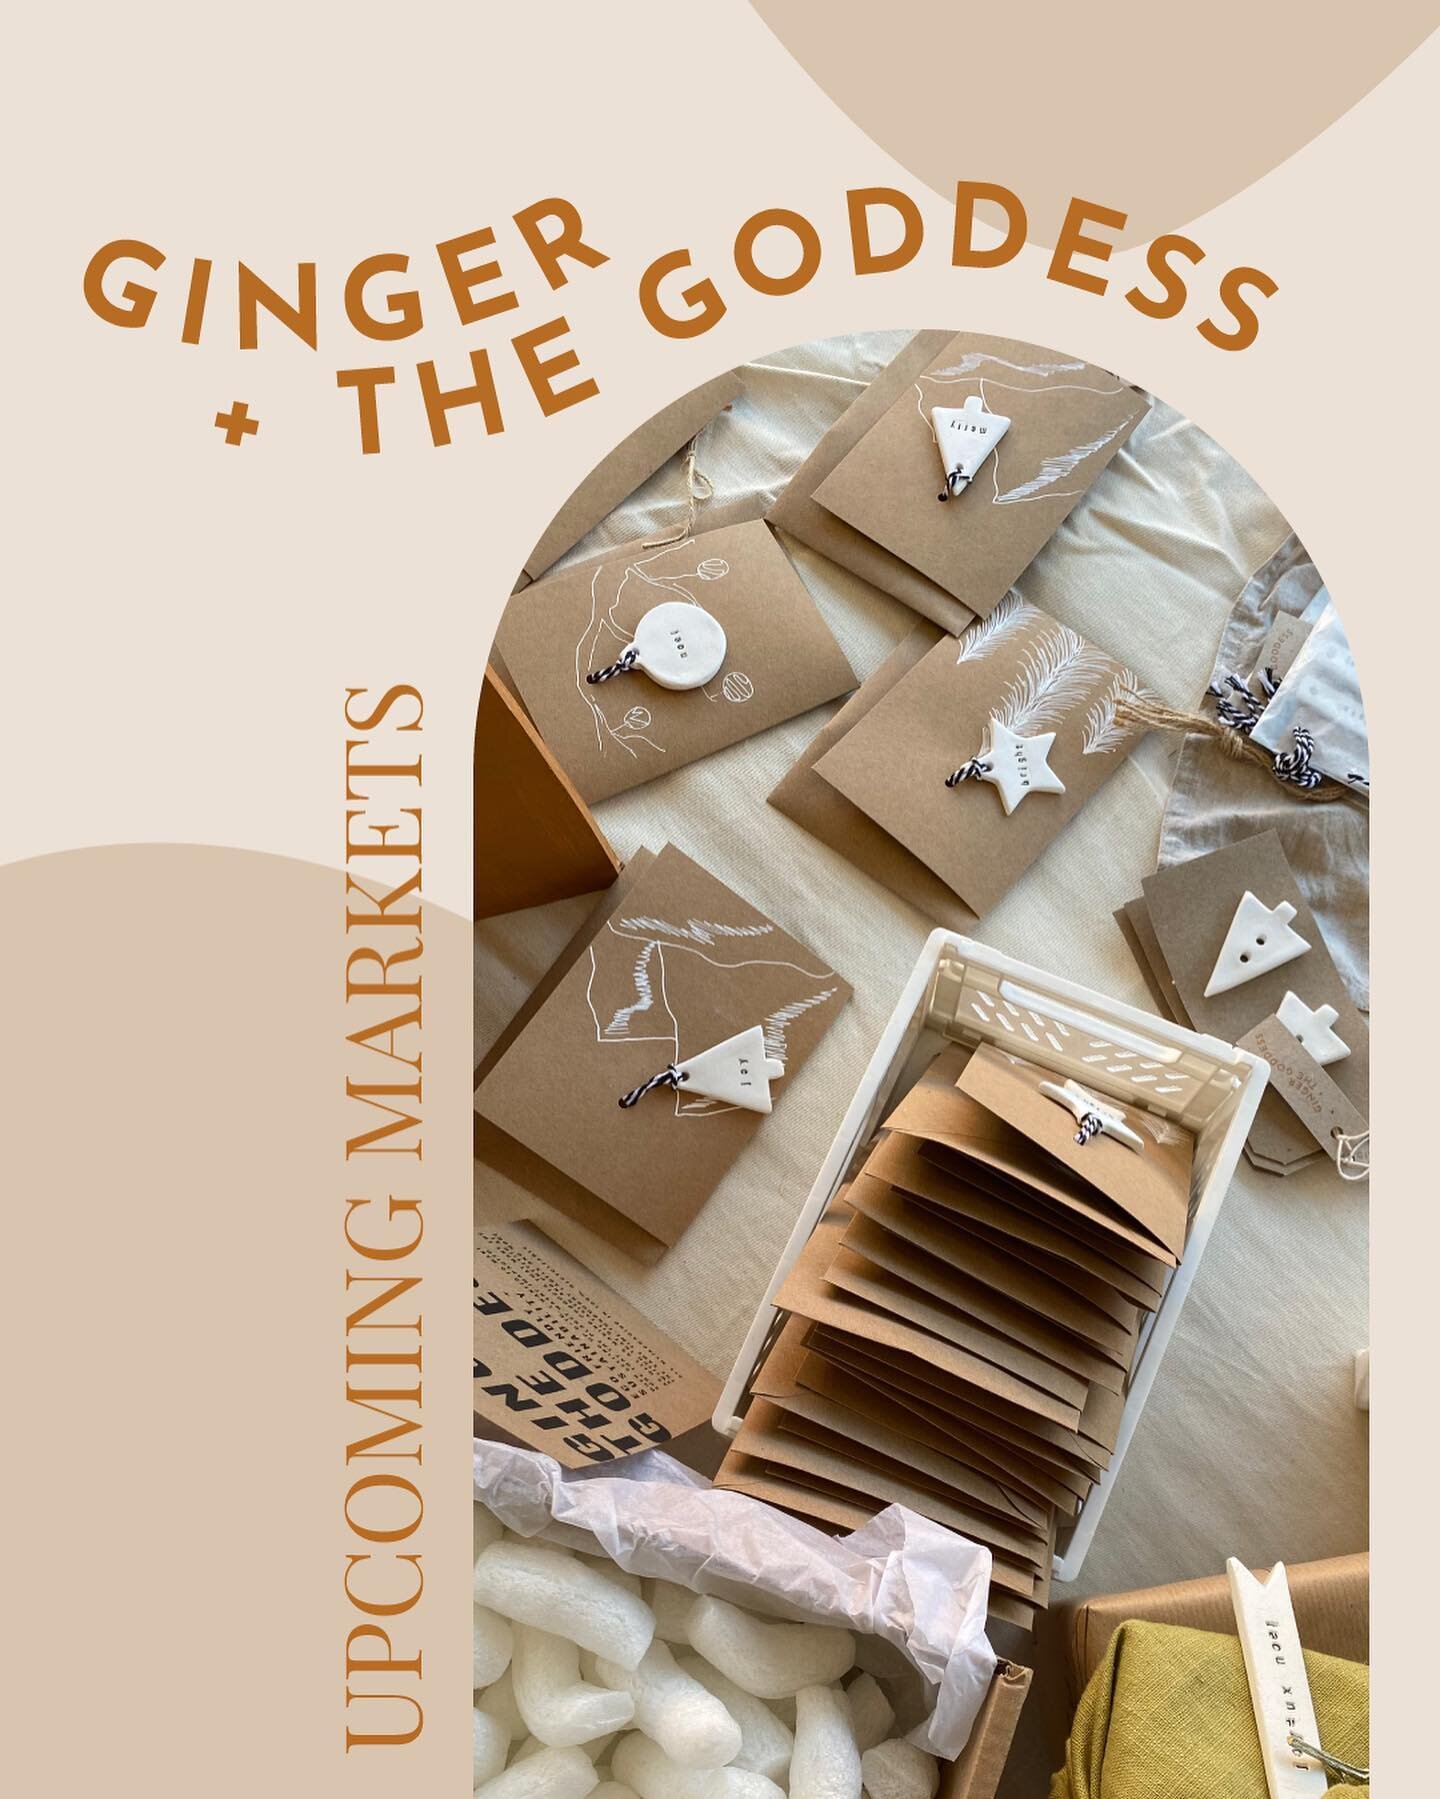 🎄UPCOMING MARKETS- Christmas 2022🎄

Tis the season! Got lots planned for the festive season! So here&rsquo;s just a little post to say where and when Ginger + the goddess will be&hellip;..freezing to death 😂 and getting to met all my lovely custom